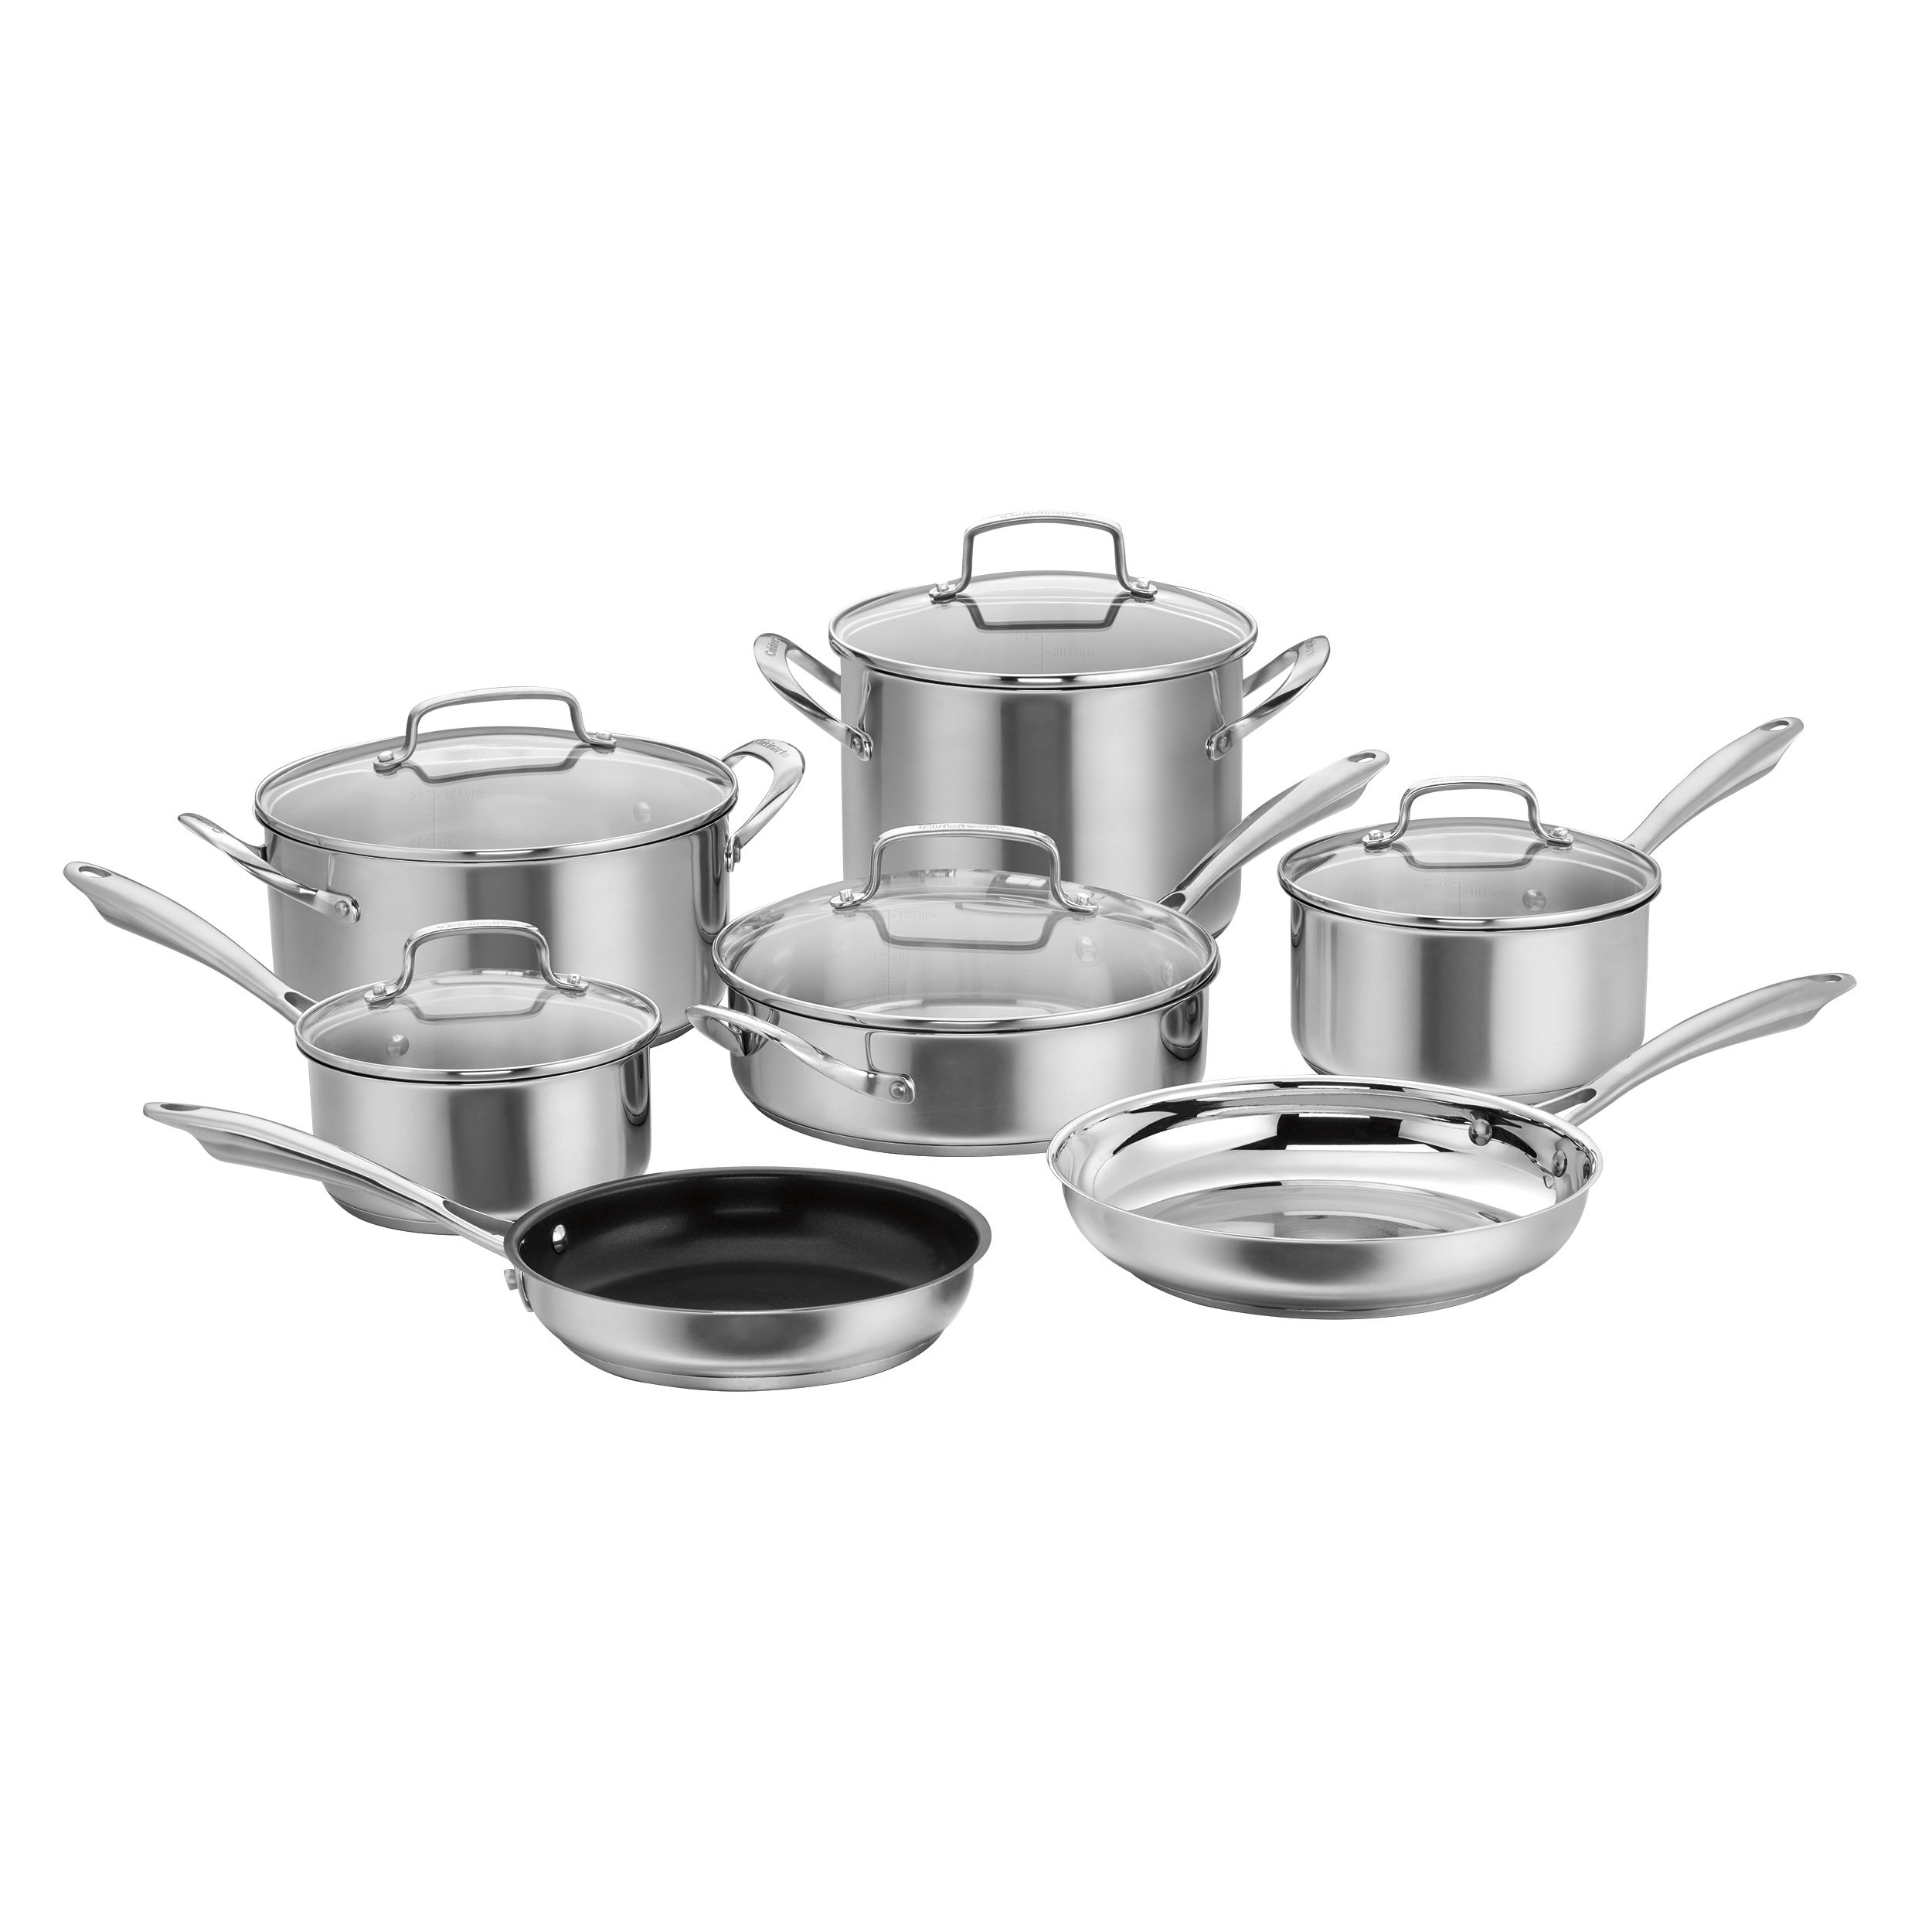  Gibson Home Back to Basics Stainless Steel Cookware Set, 32- Piece , Stainless Steel,Silver: Home & Kitchen